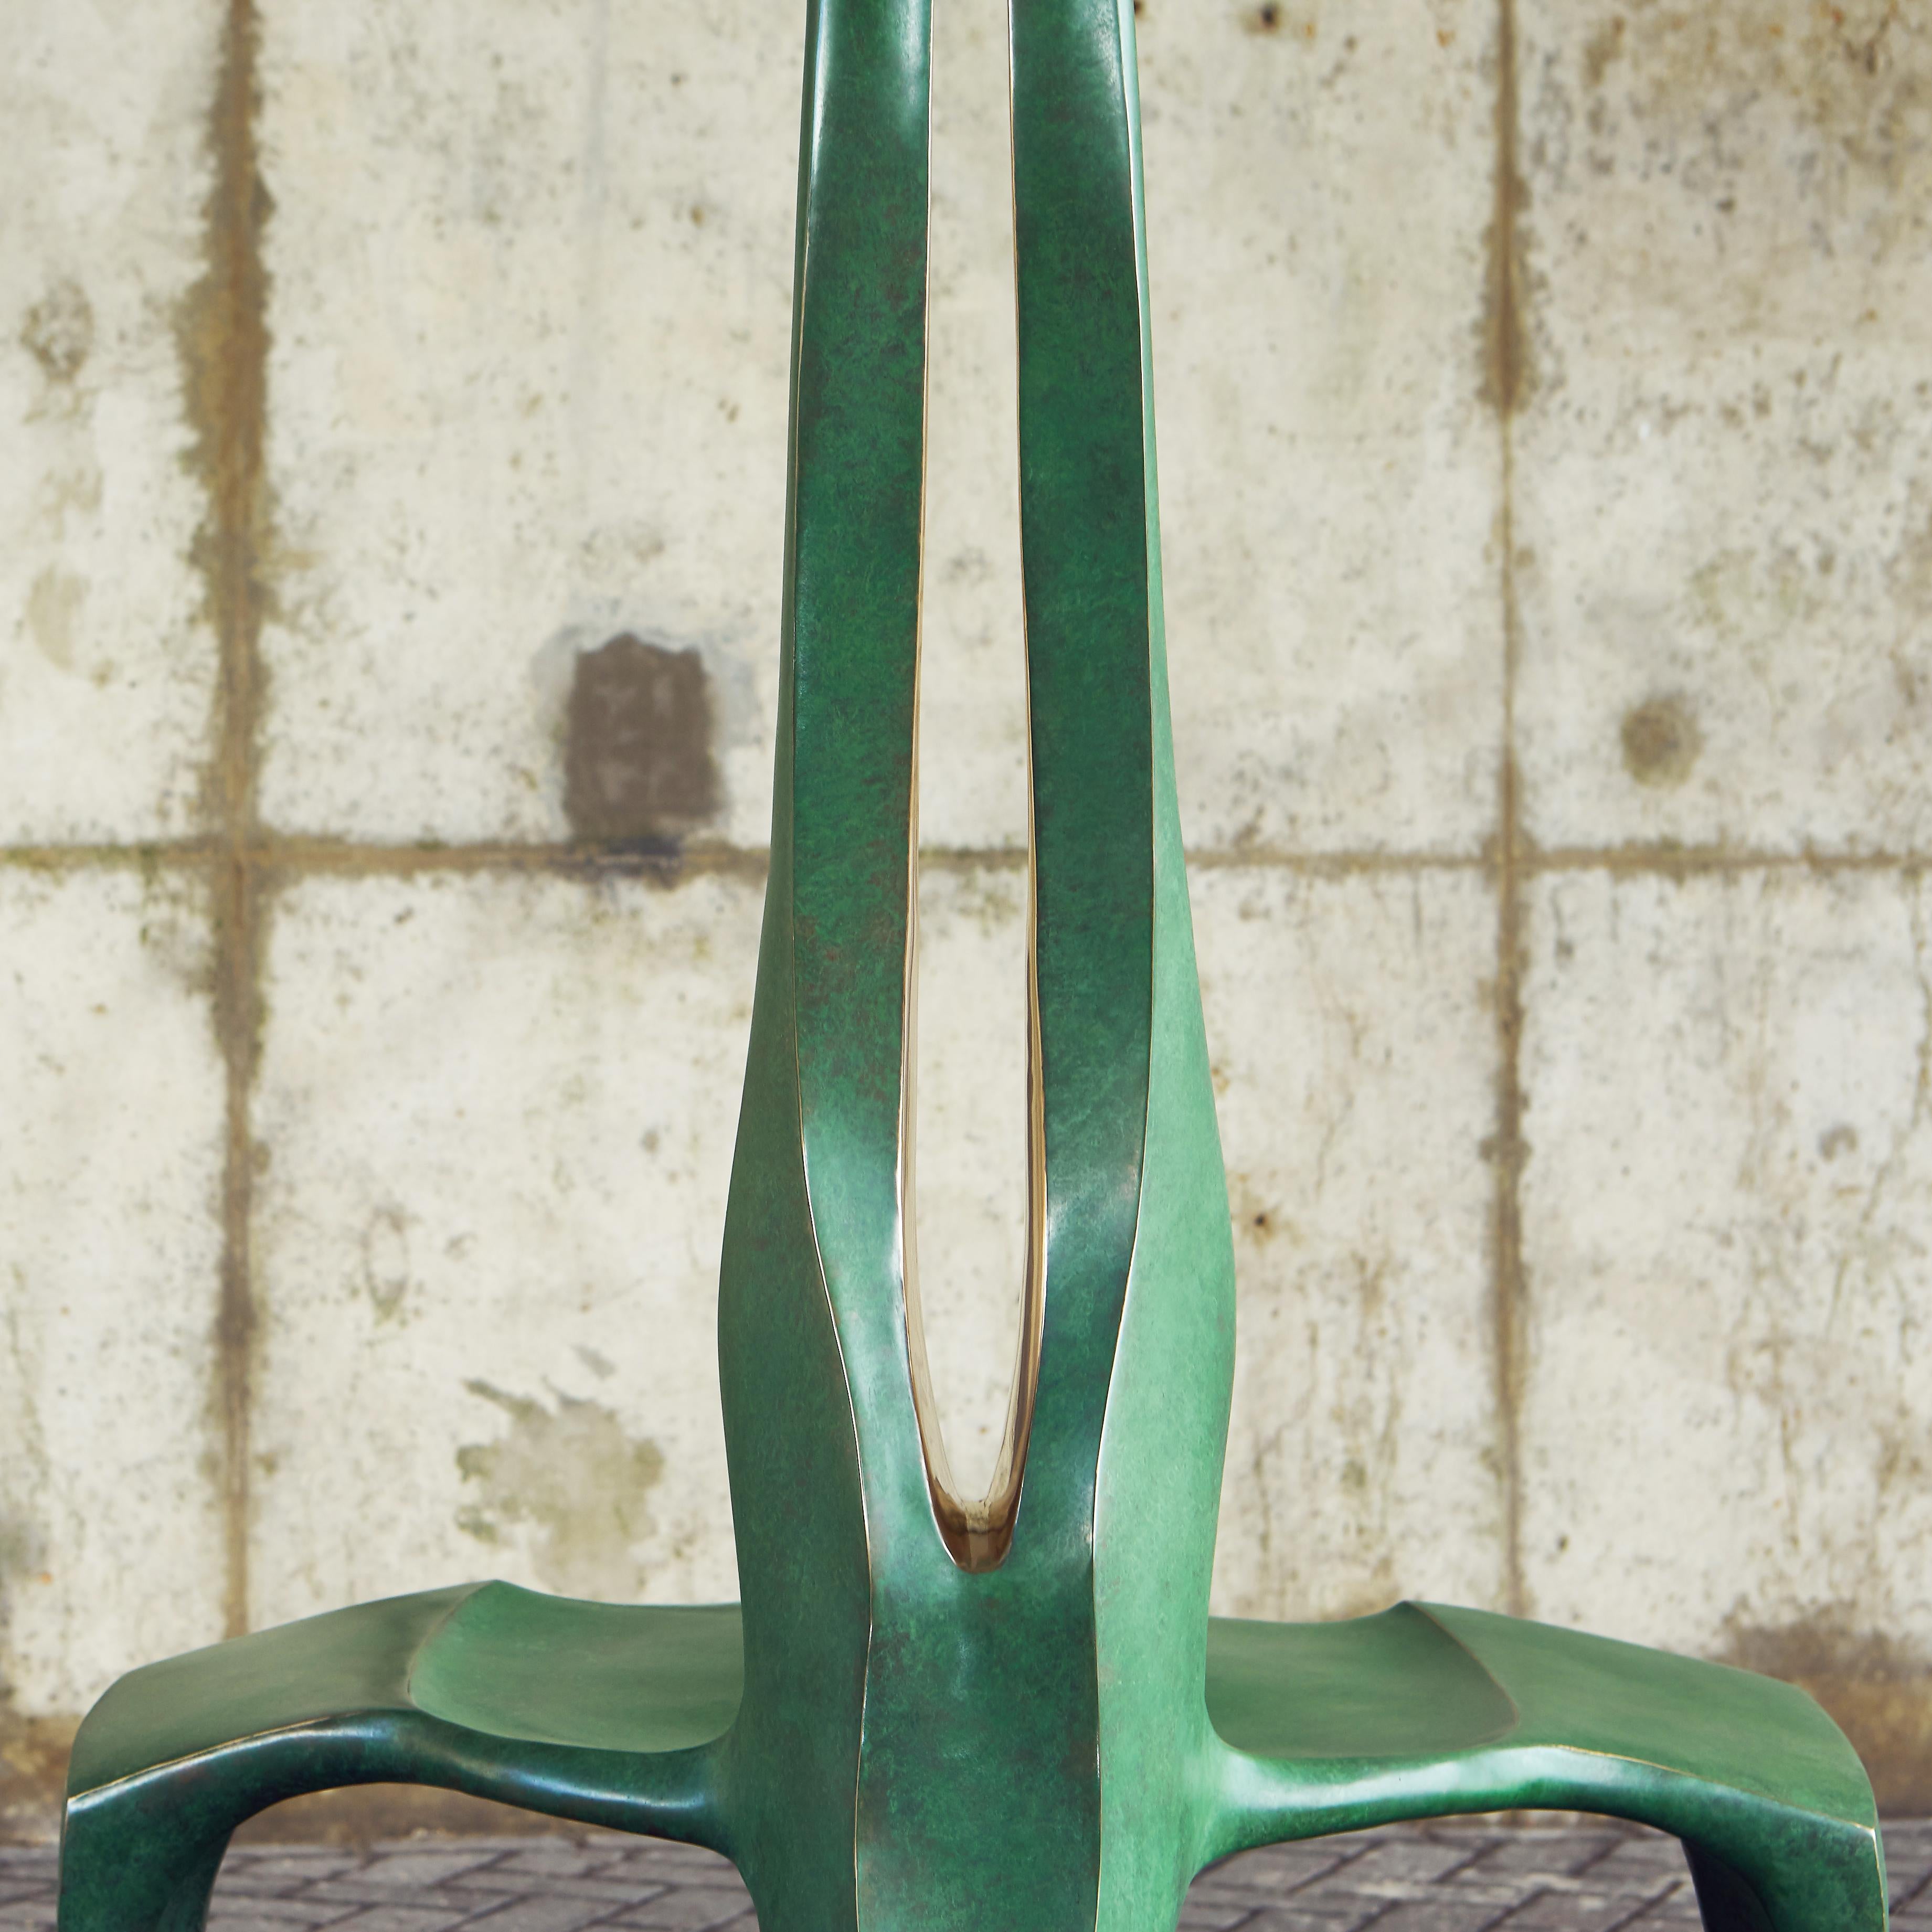 Contemporary, Green and Unique Bronze Casted Dragon Kre Chair by Alun Heslop For Sale 3